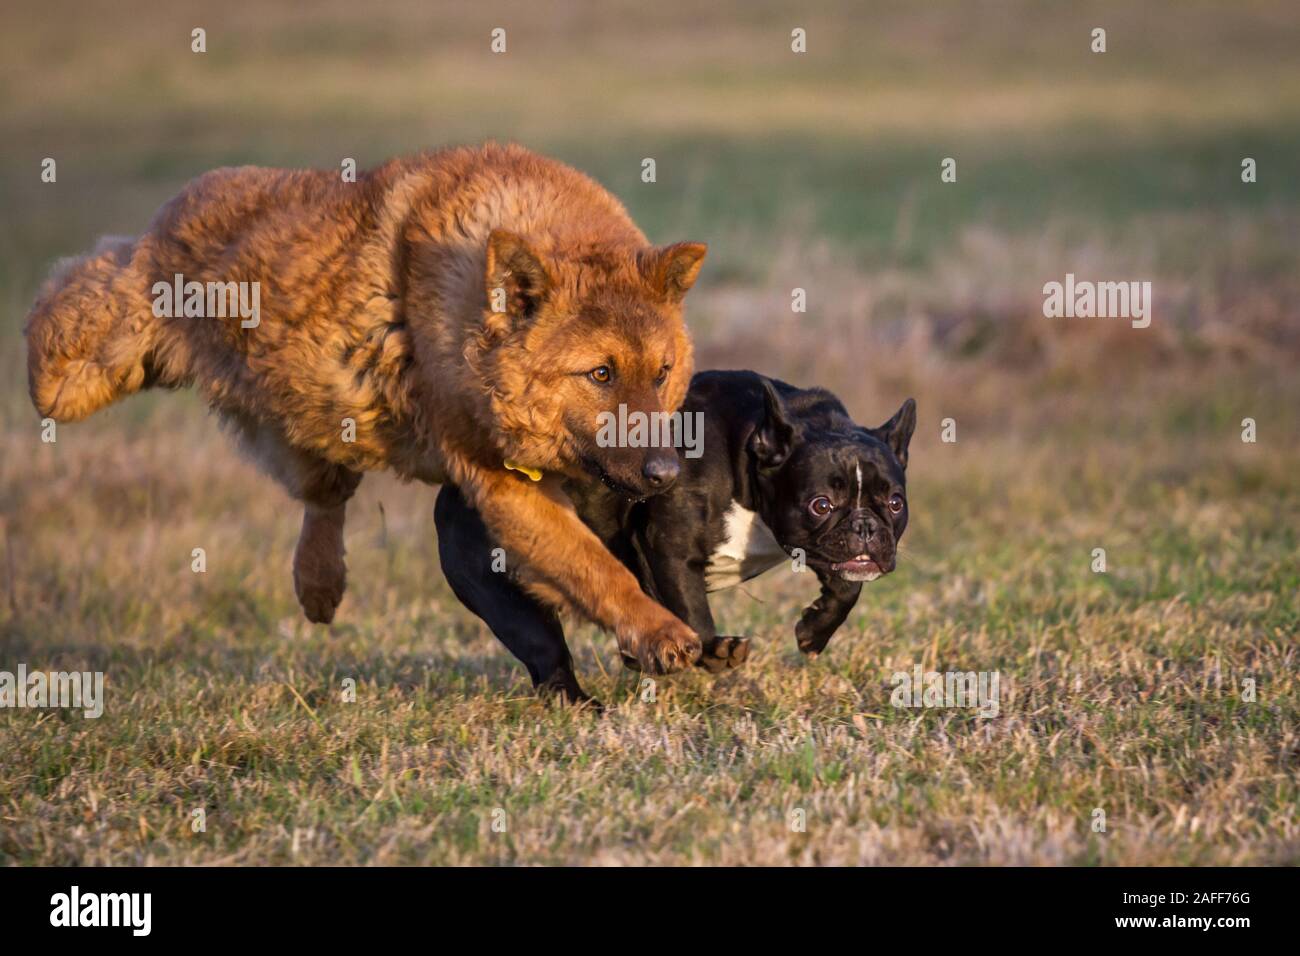 Two dogs playing, a French Bulldog and a Westerwälder Kuhhund (Old German Sheepdog) Stock Photo